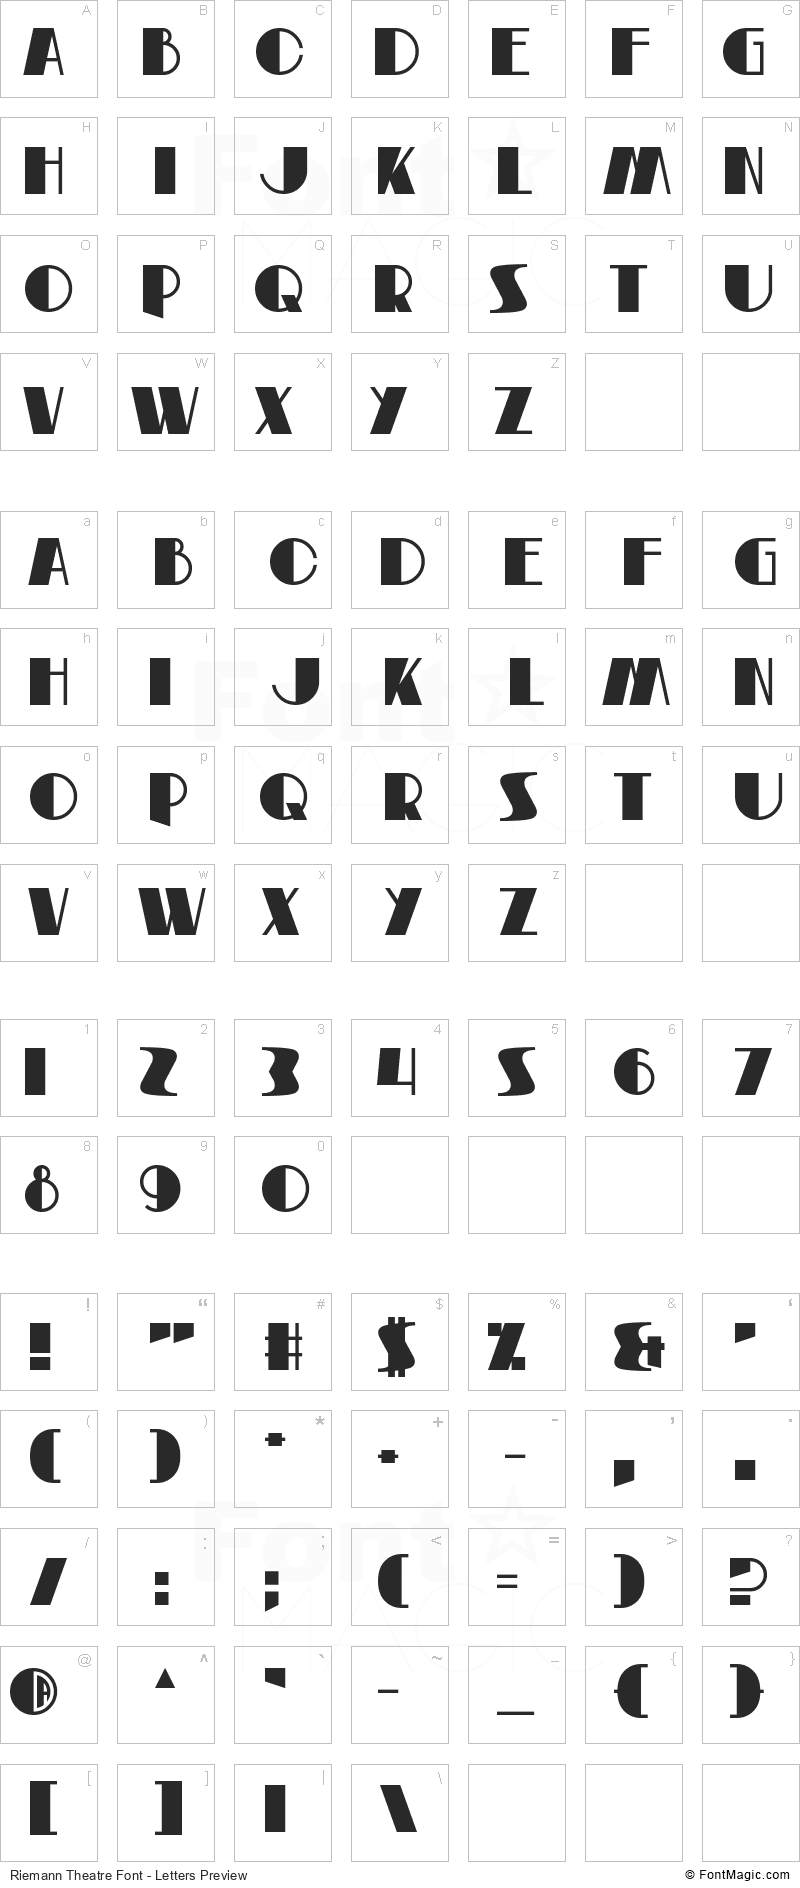 Riemann Theatre Font - All Latters Preview Chart